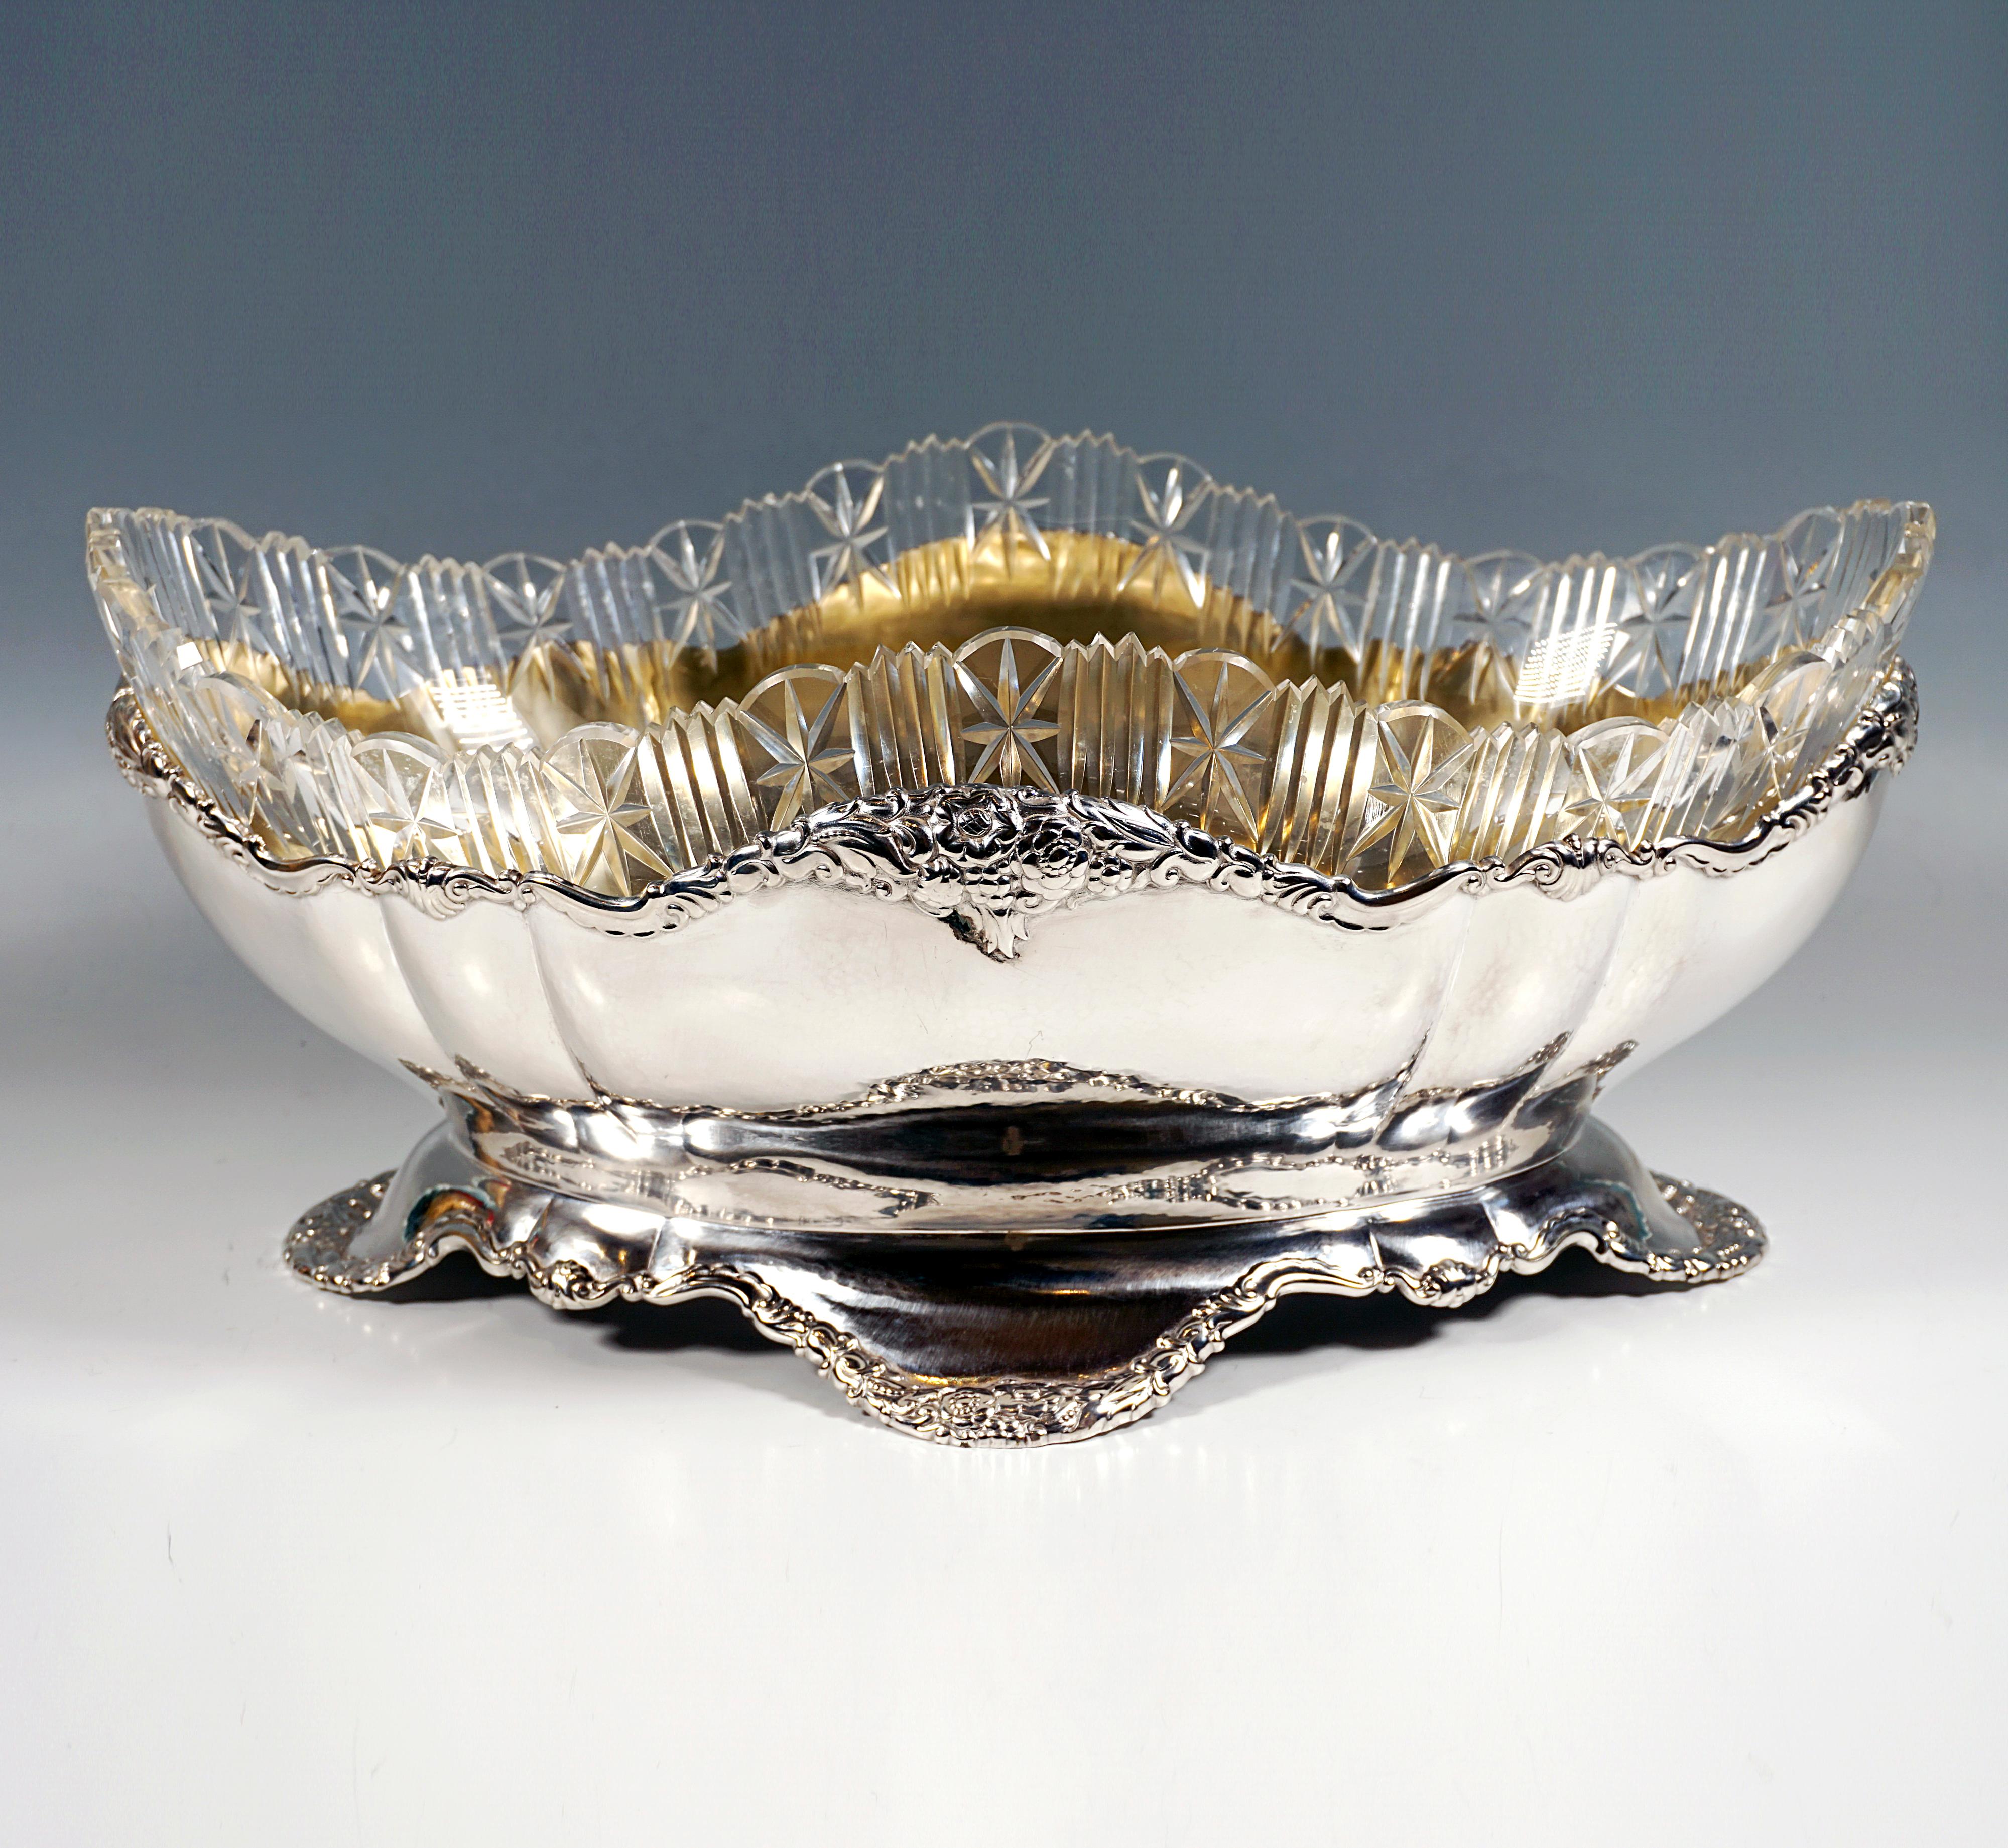 Early 20th Century Art Nouveau Silver Jardinière With Cut Glass Liner, Theodor Müller Germany c1900 For Sale